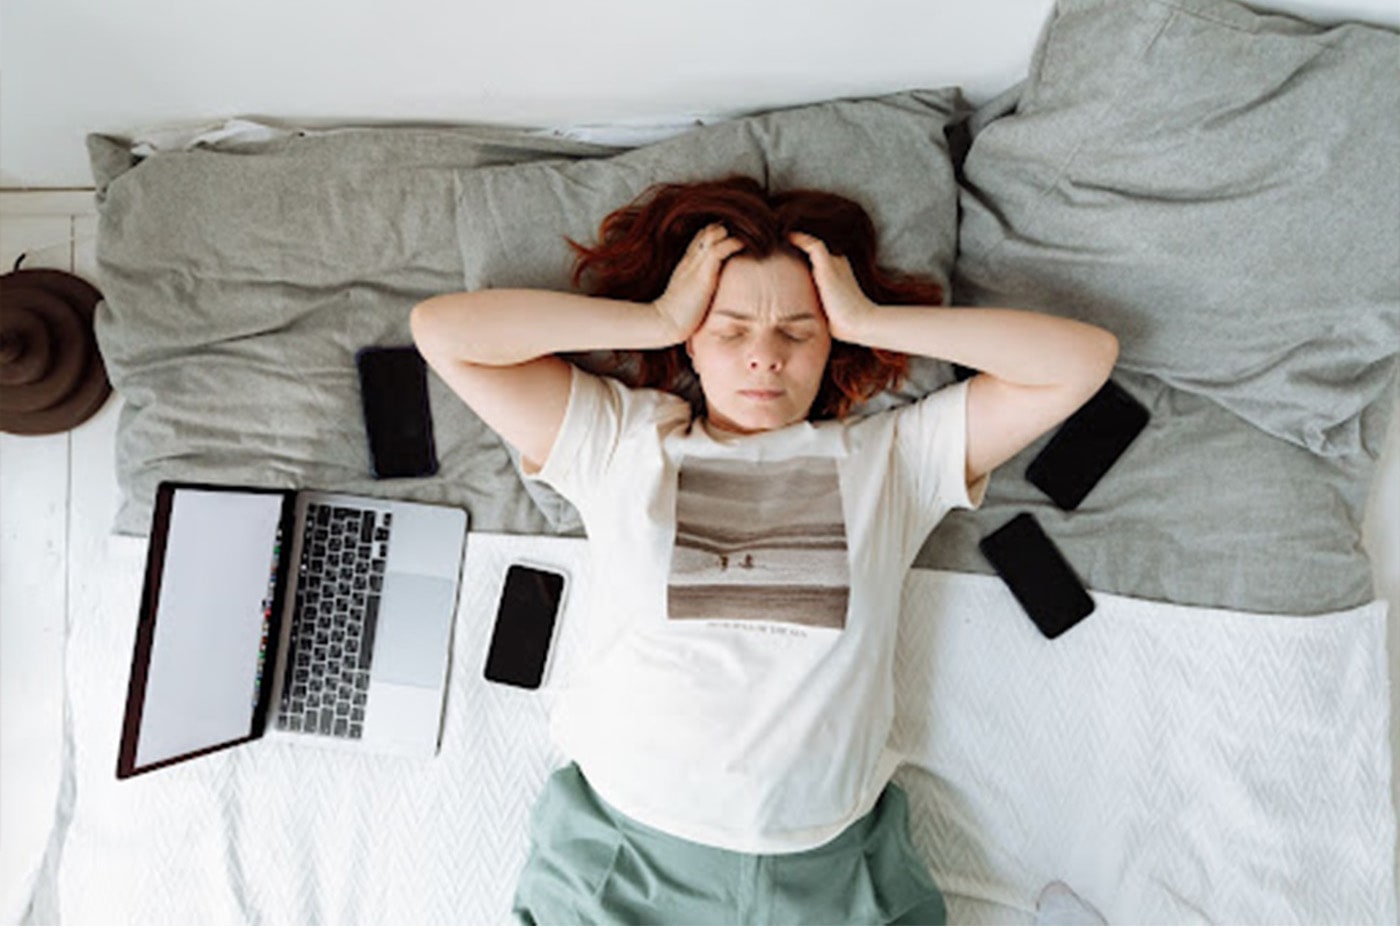 Girl laying on a bed with a distressed look on her face. Eyes closed, both hands pushing her hair back. Open Laptop and 4 cell phones surrounding her.